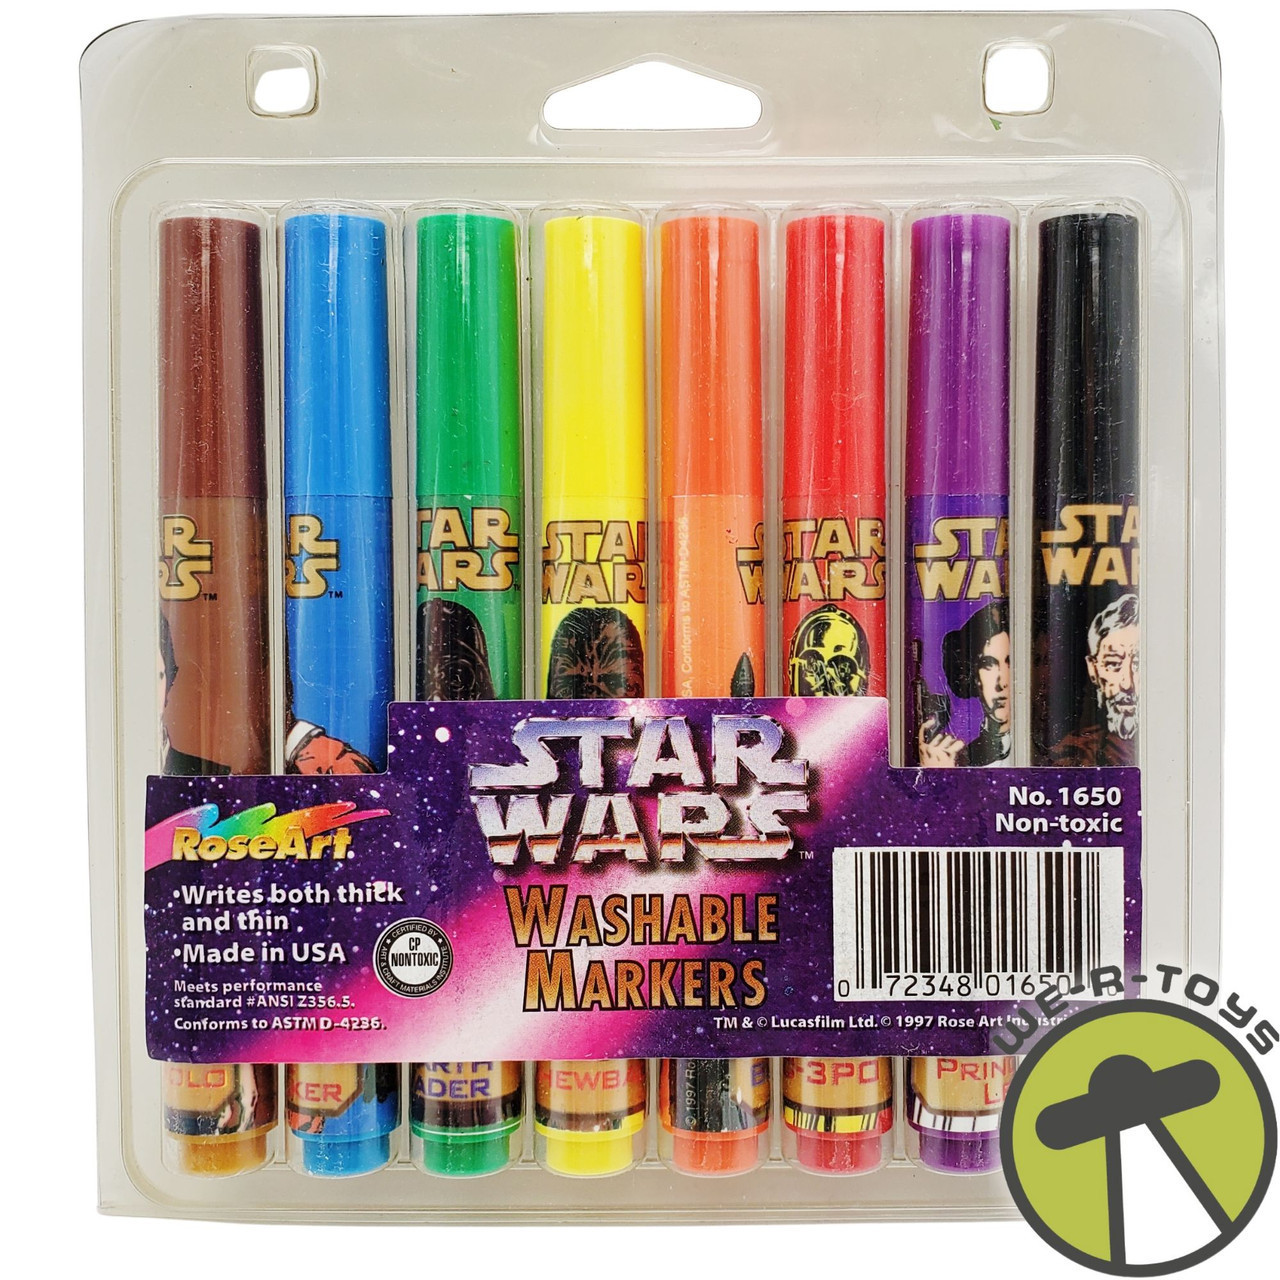 Star Wars Washable Non-Toxic Markers 1997 RoseArt #1650 NRFP - We